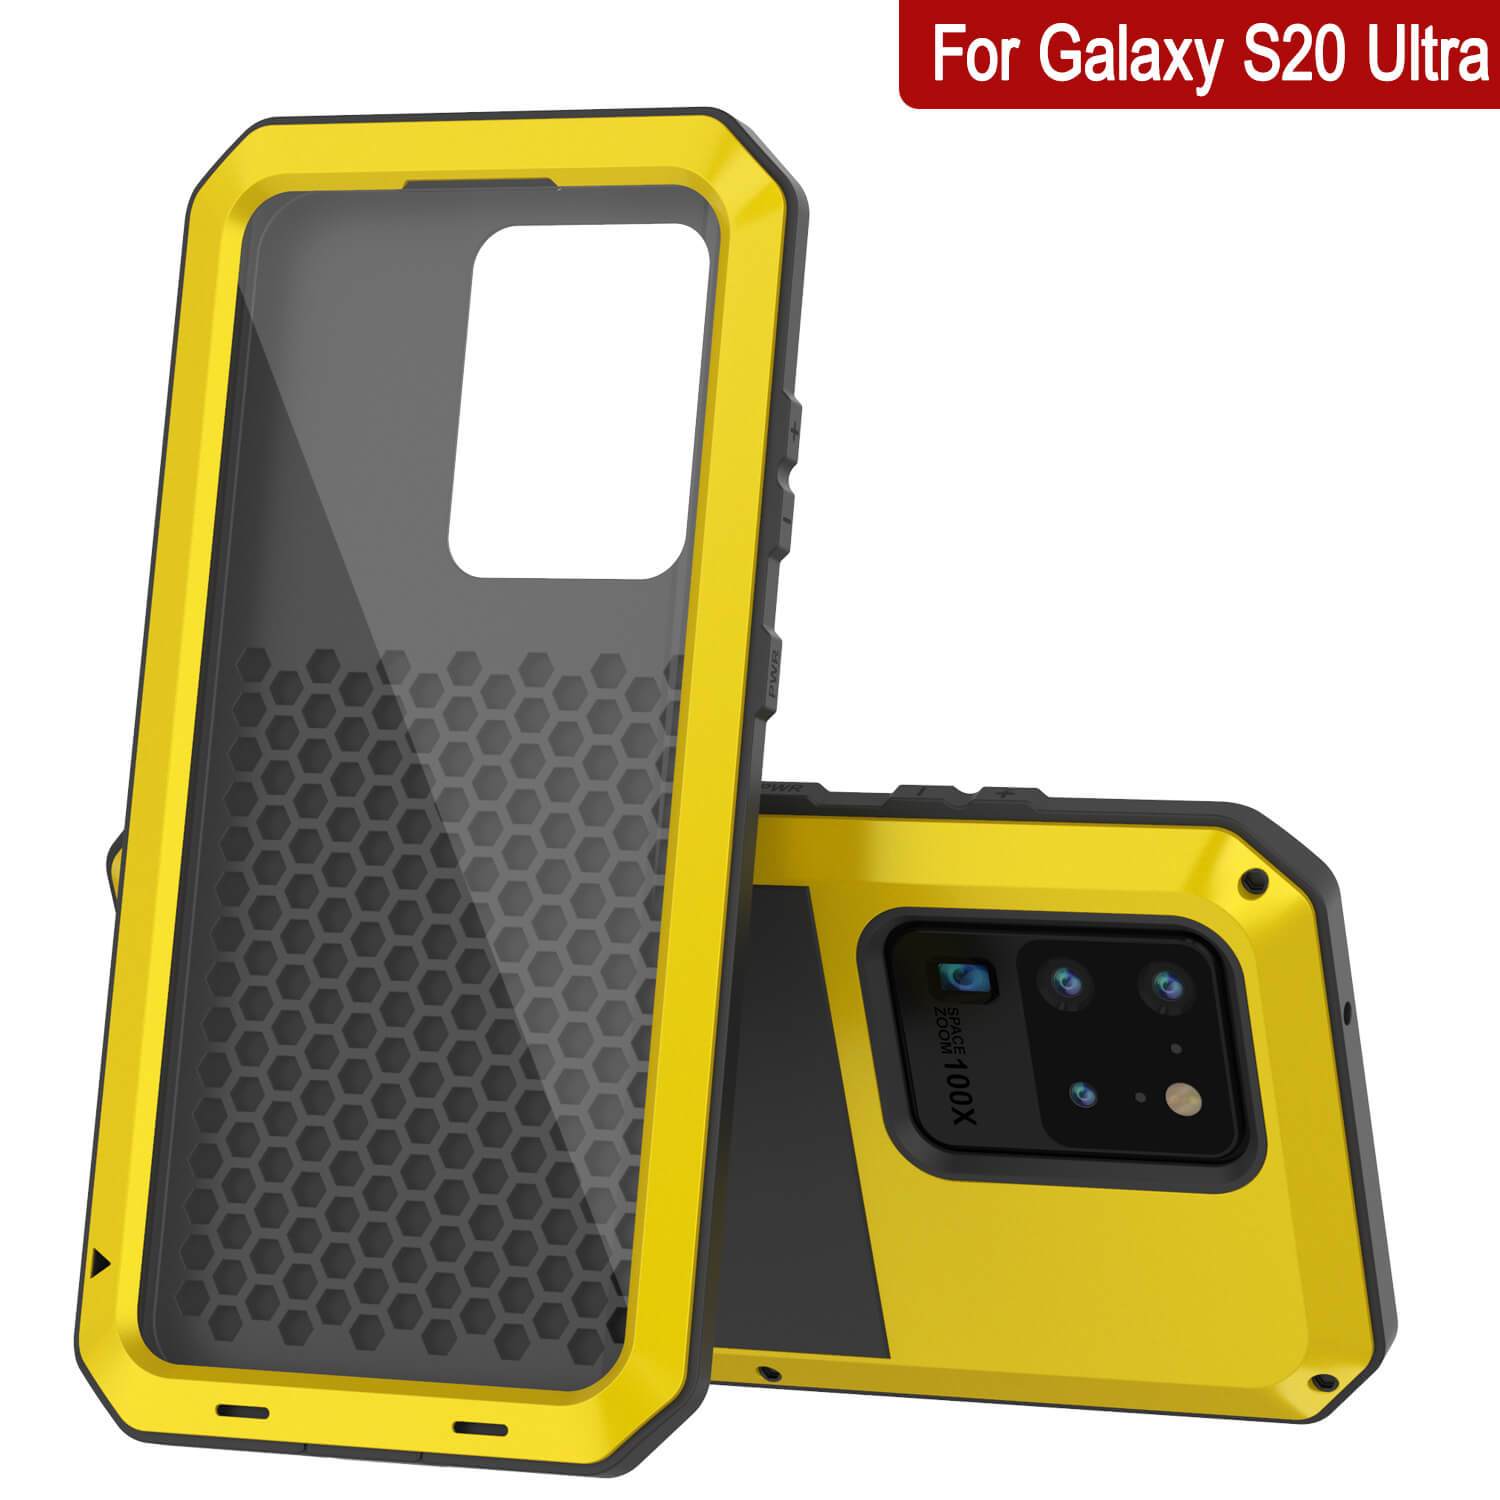 Galaxy S20 Ultra Metal Case, Heavy Duty Military Grade Rugged Armor Cover [Neon]